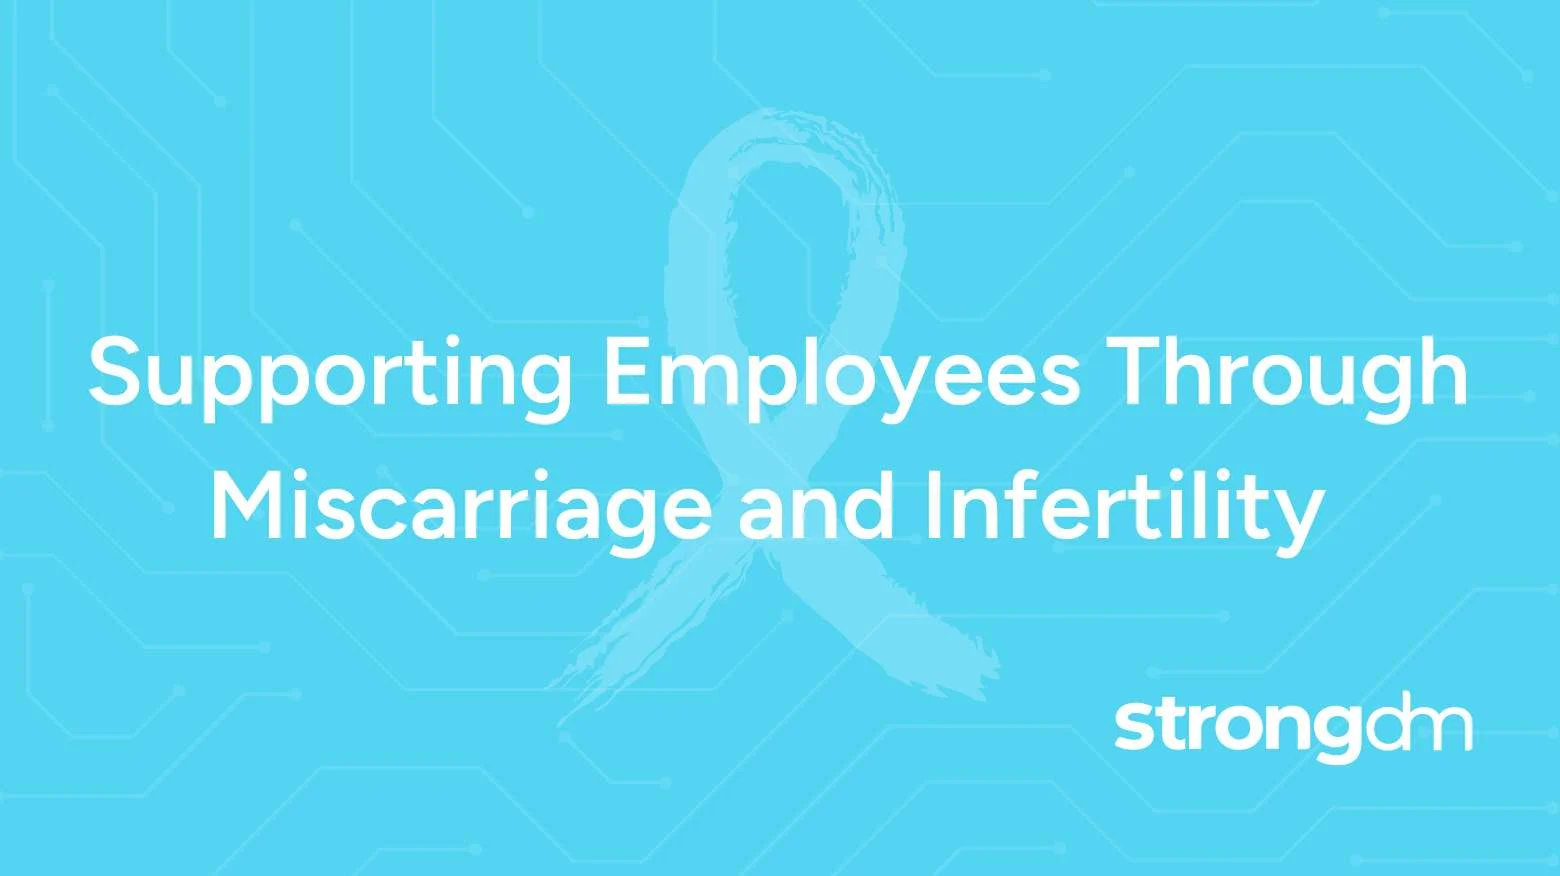 Infertility, Miscarriage, and the Workplace: Why Sick Time Isn’t Enough and How Companies Can Fix It